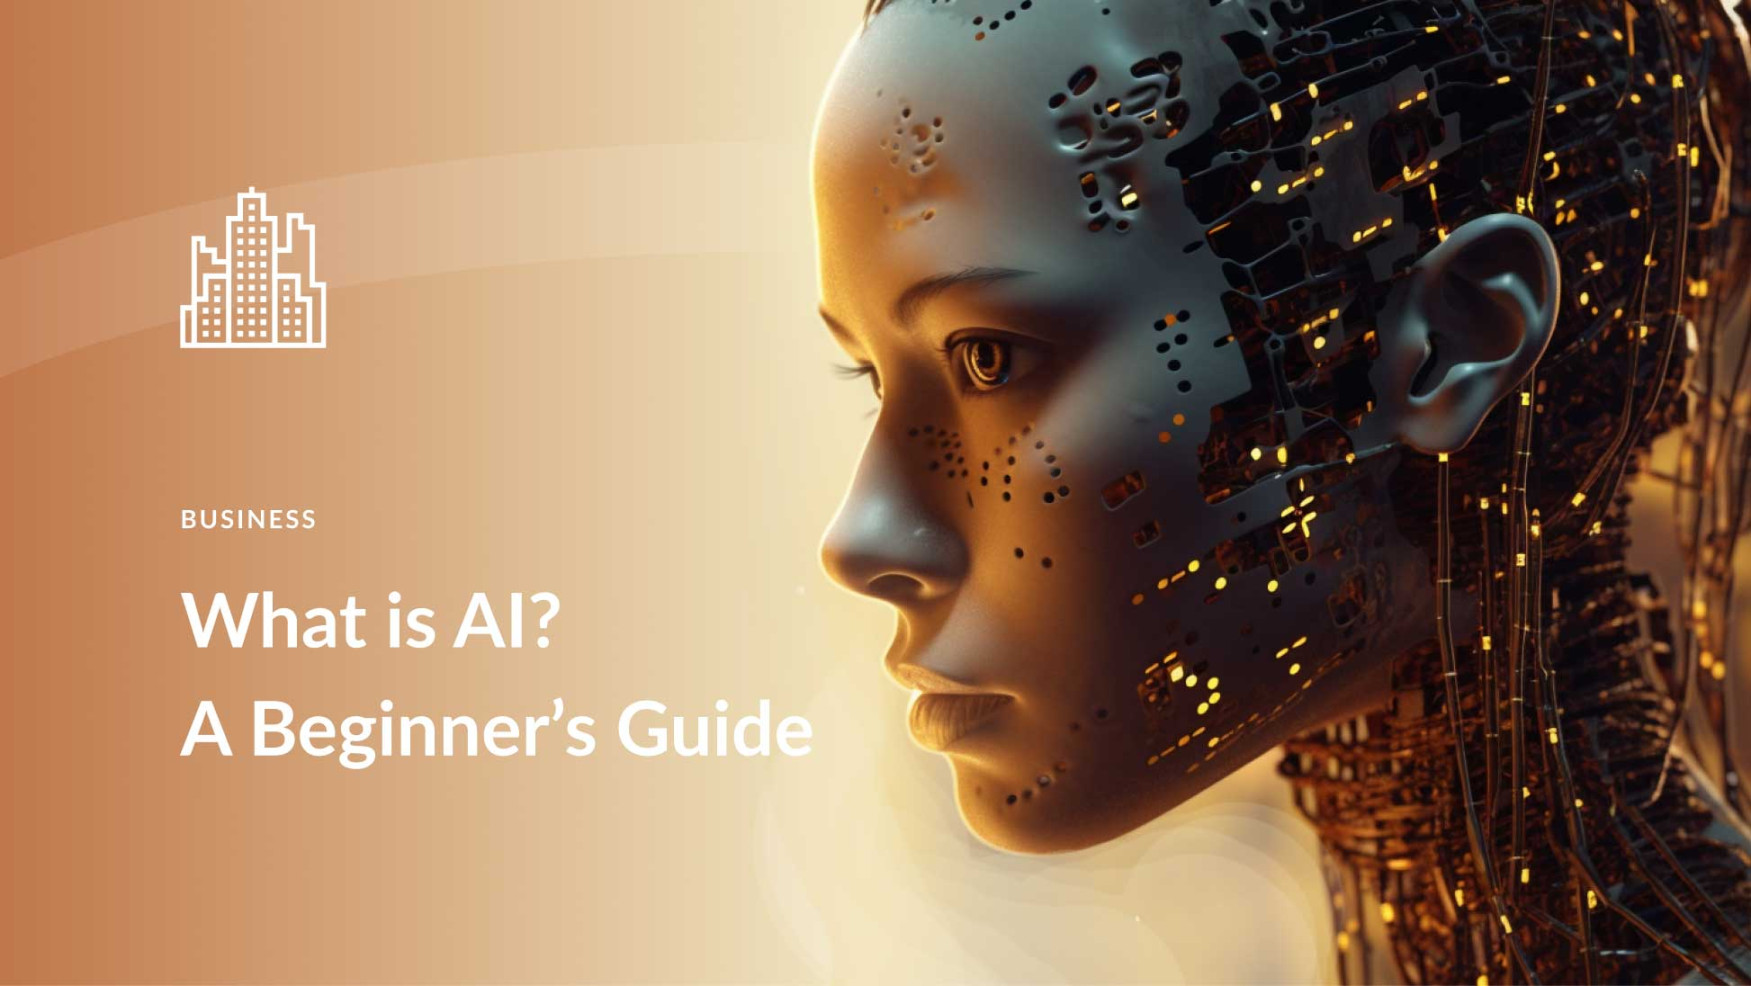 What is AI? A Beginner